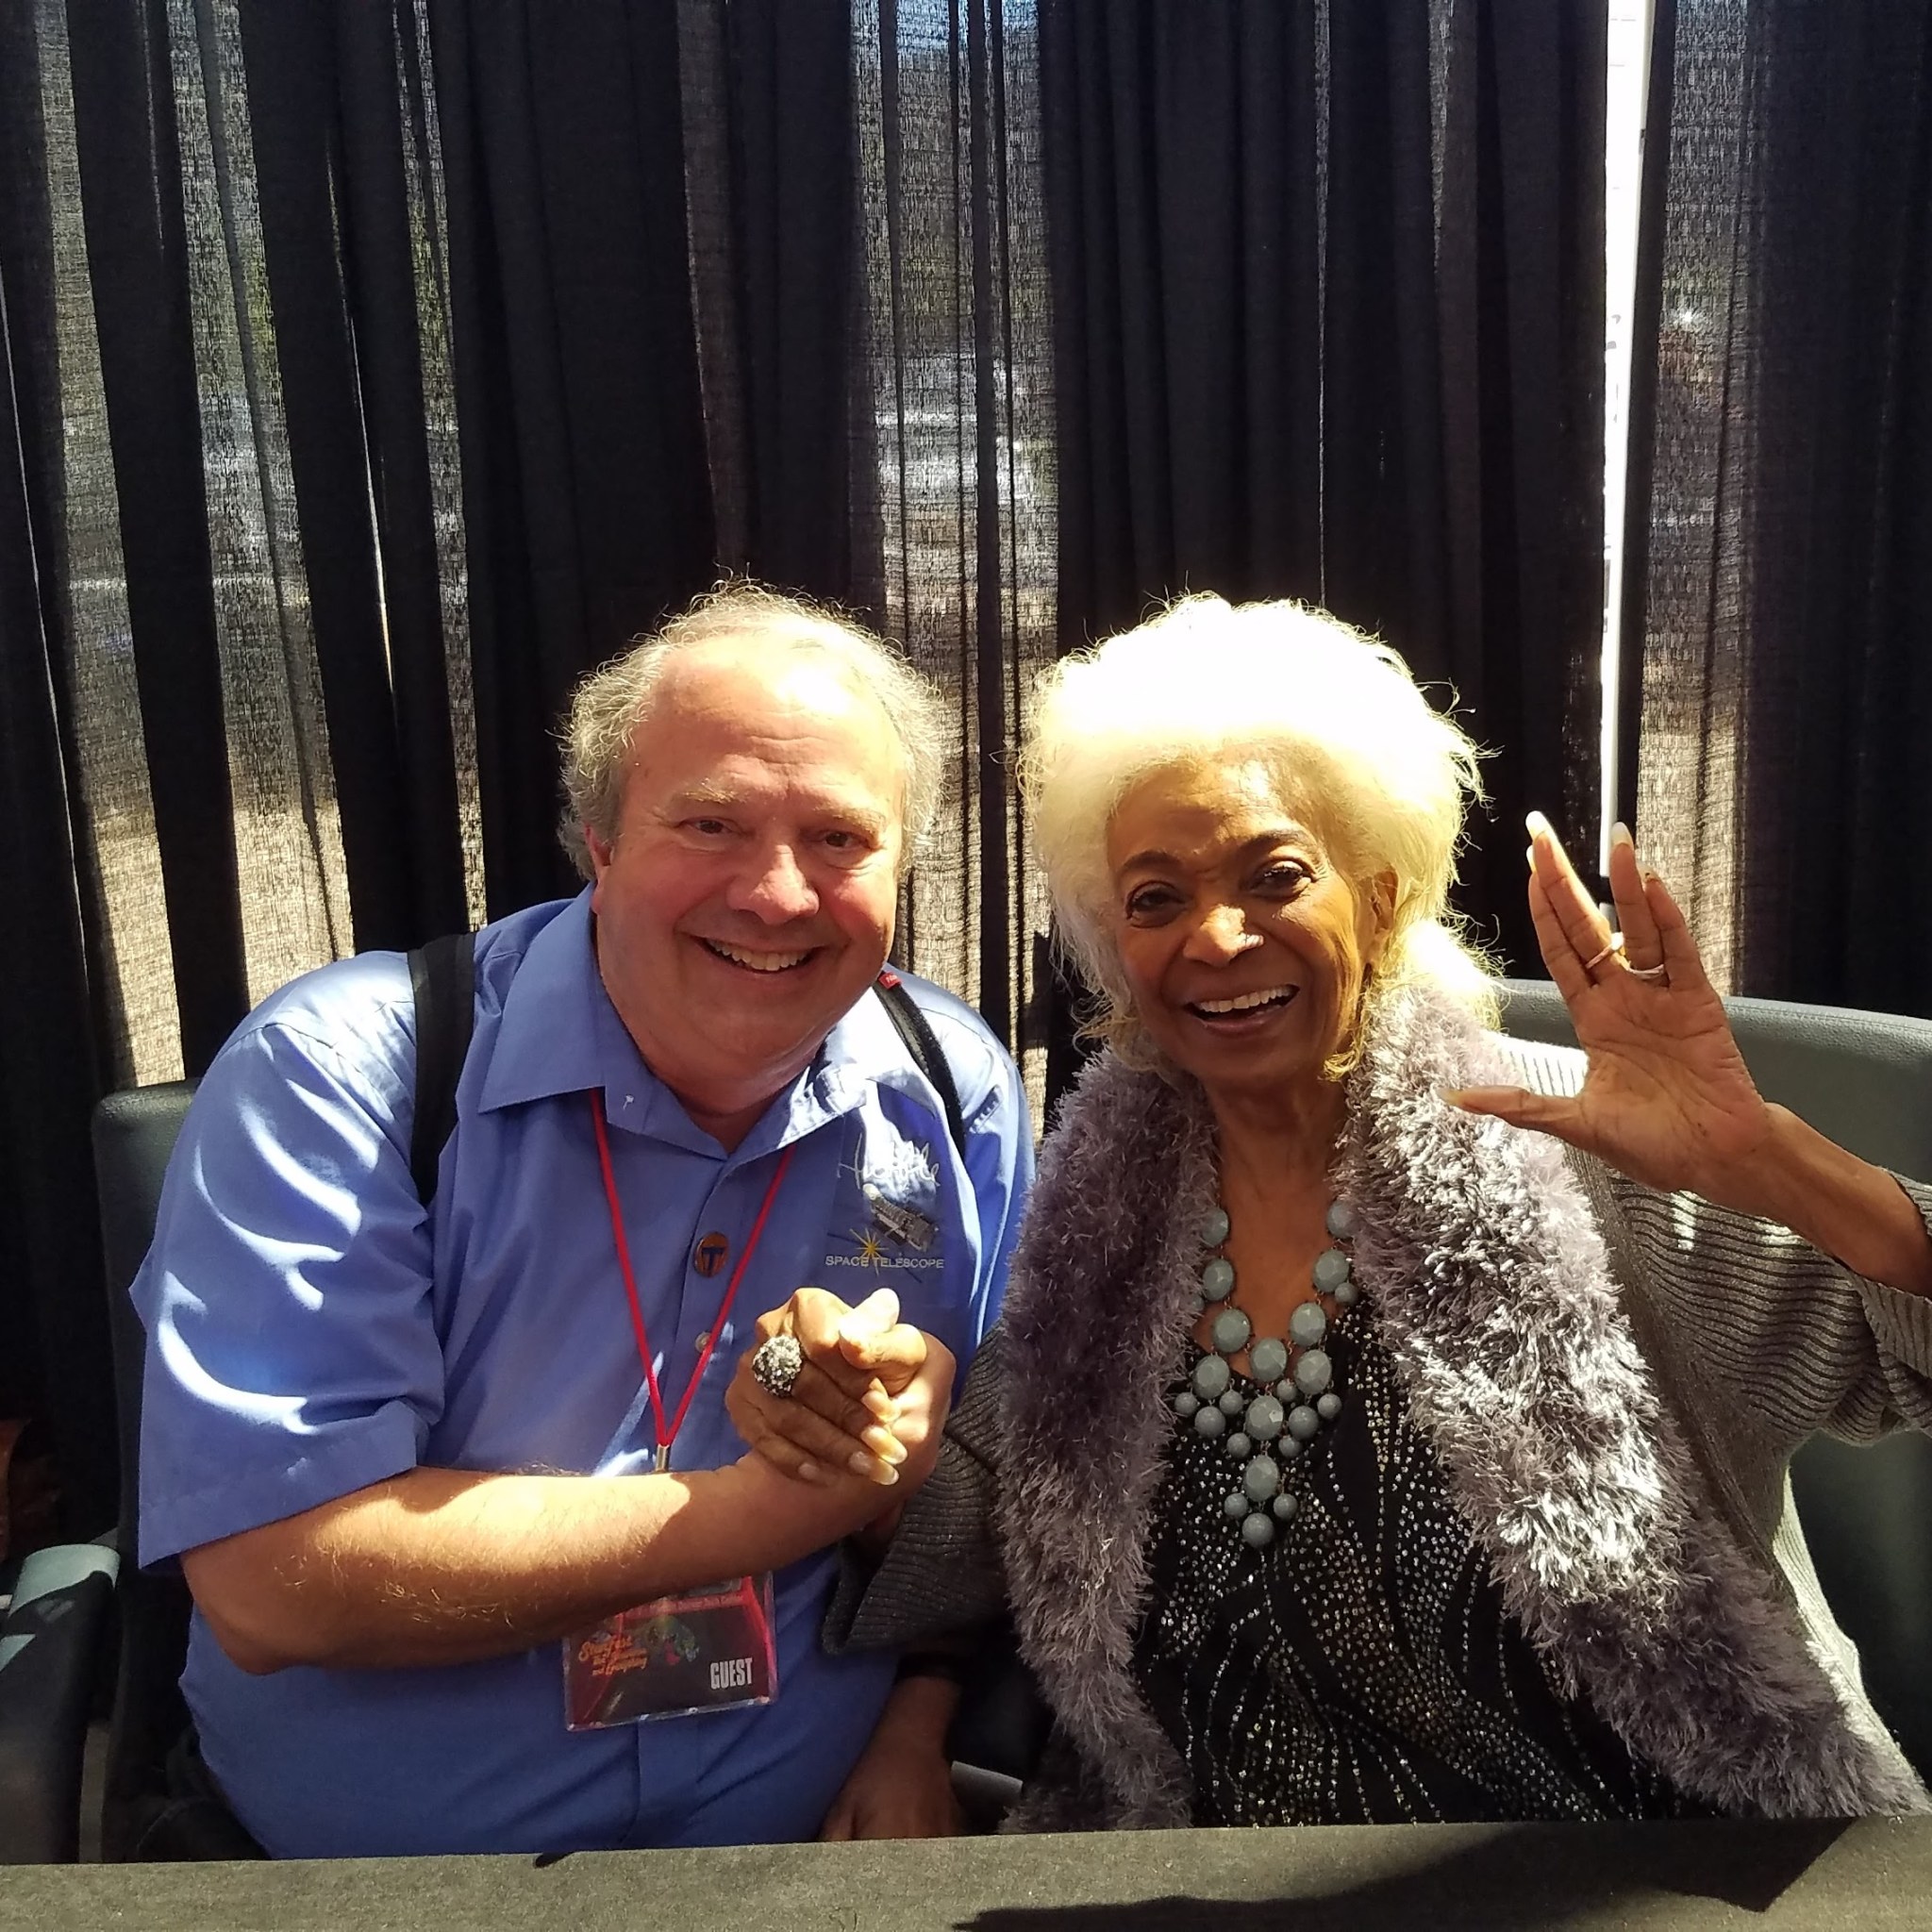 Ken Carpenter and Nichelle Nichols smile for a photo. Nichelle is holding her left hand in the Vulcan salute hand gesture.